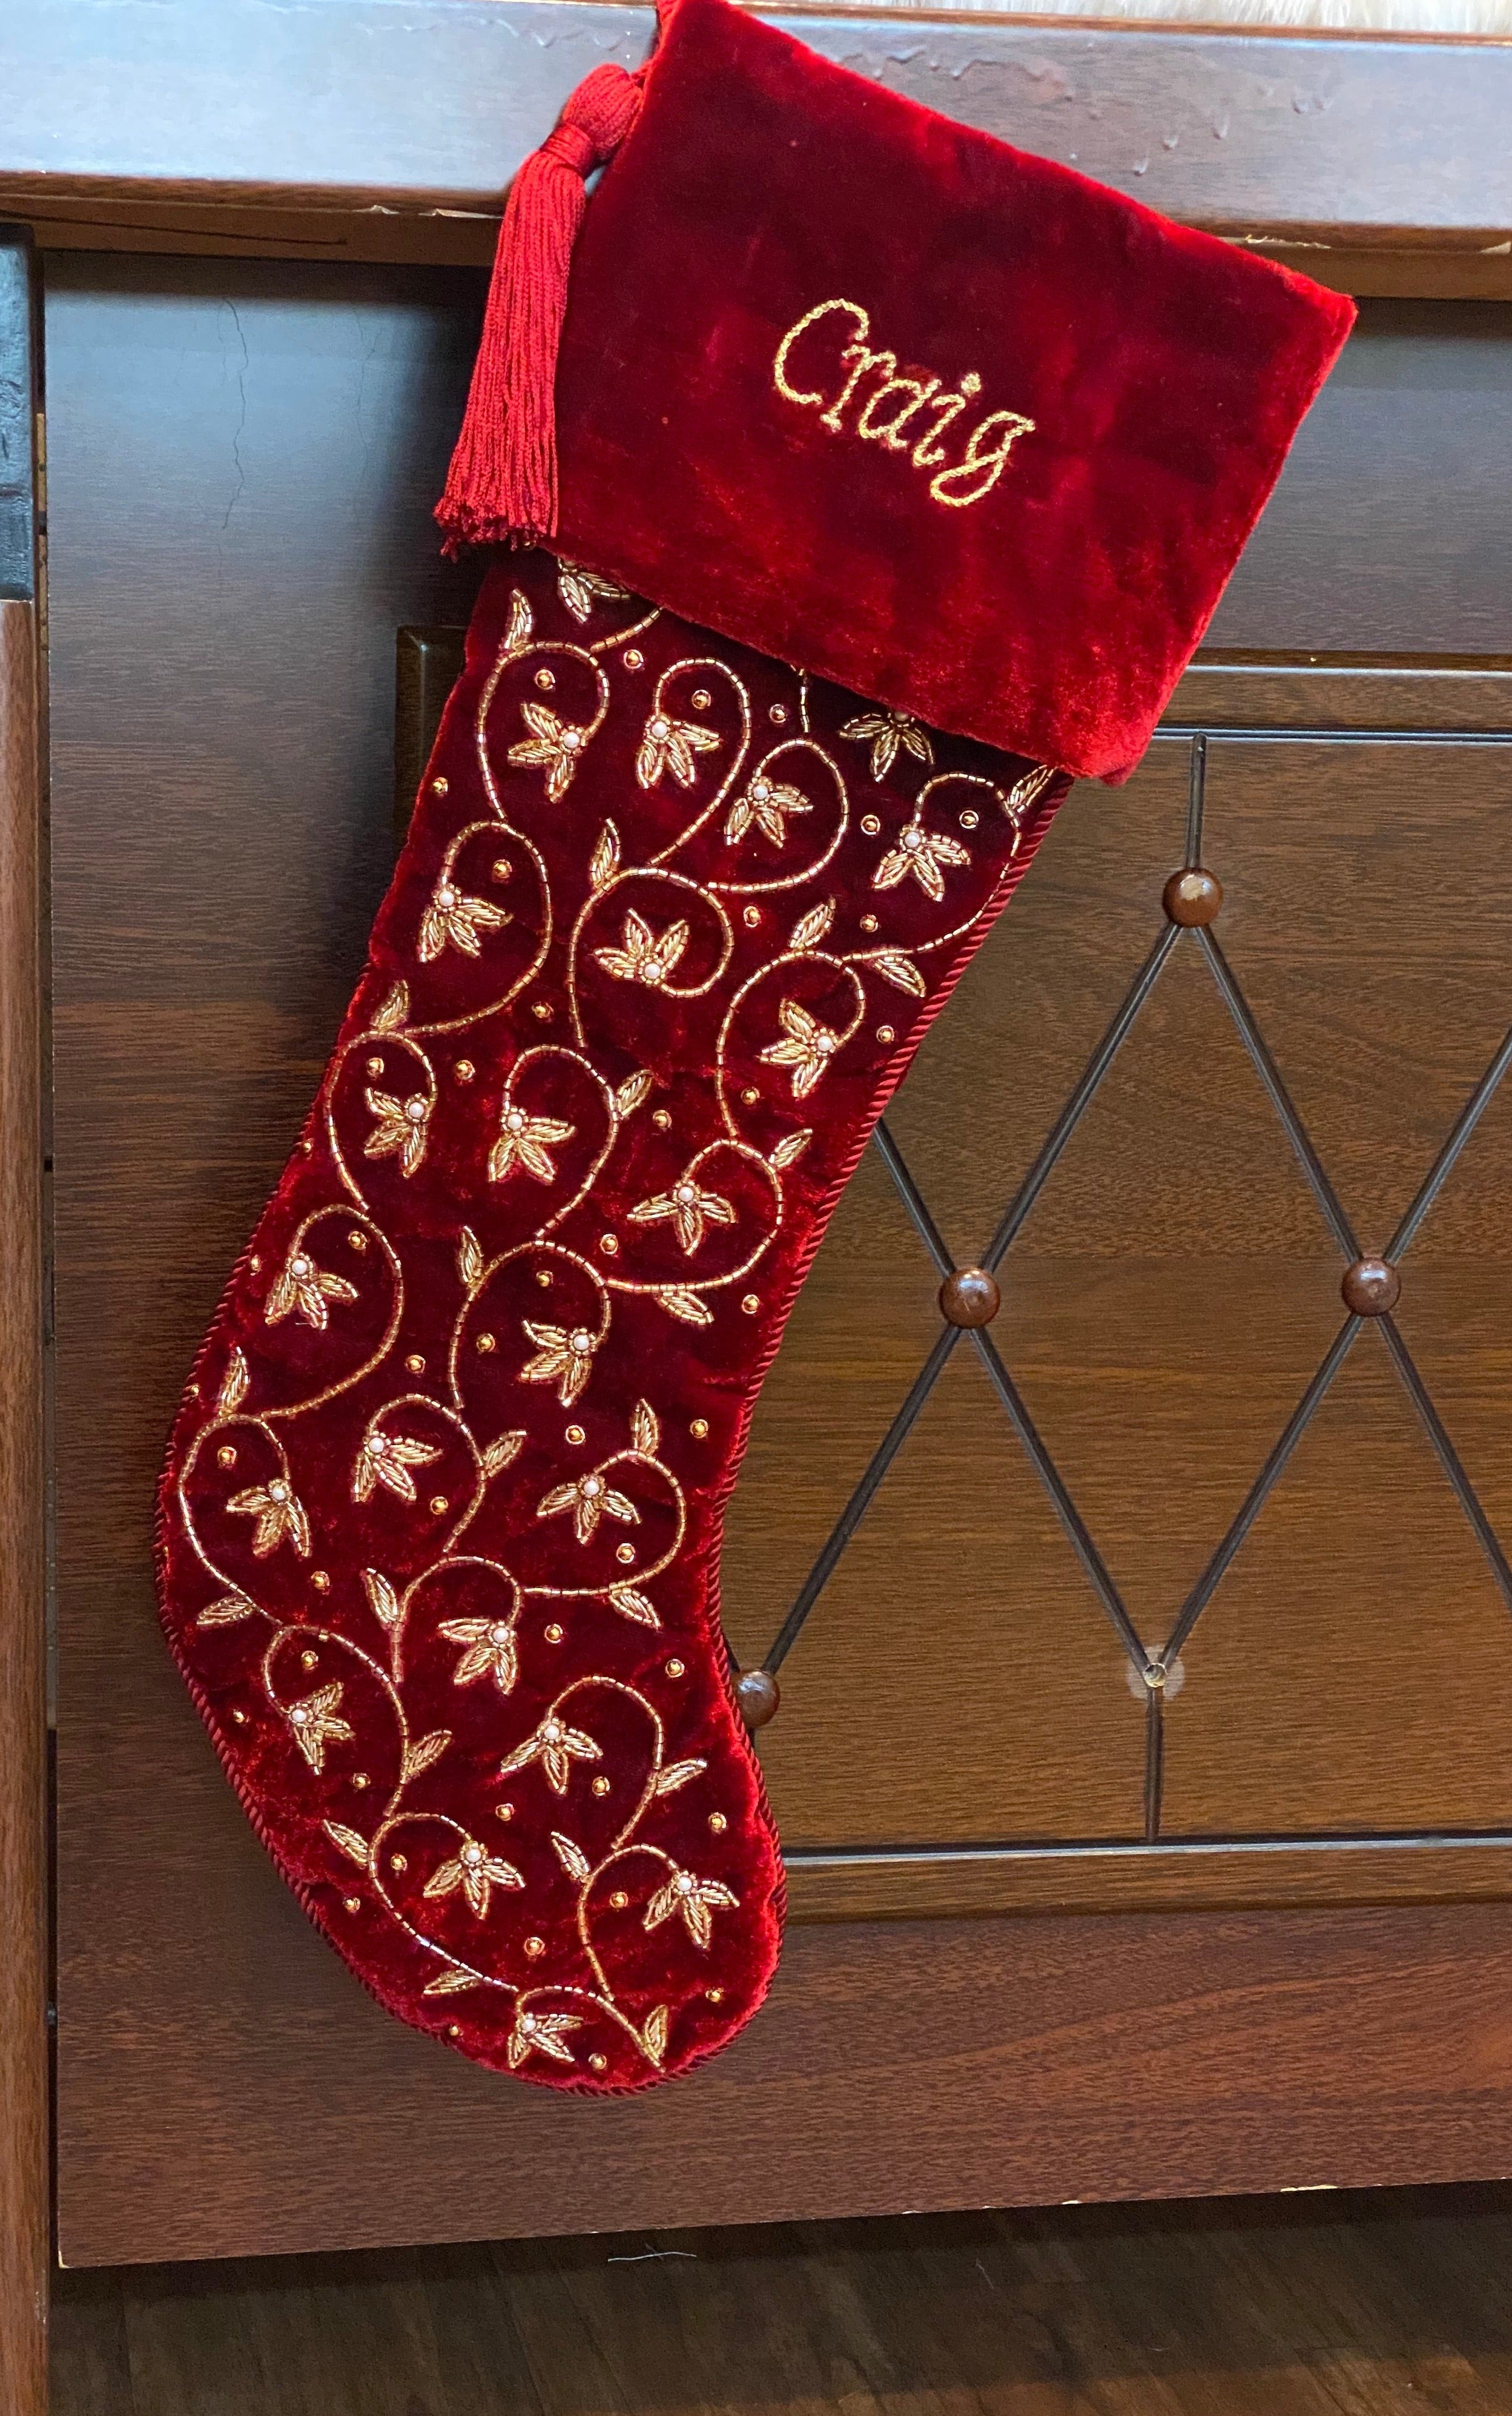 Personalised Intricate leaf Christmas Stocking- Red Velvet Christmas stocking Embroided with intricate leaf